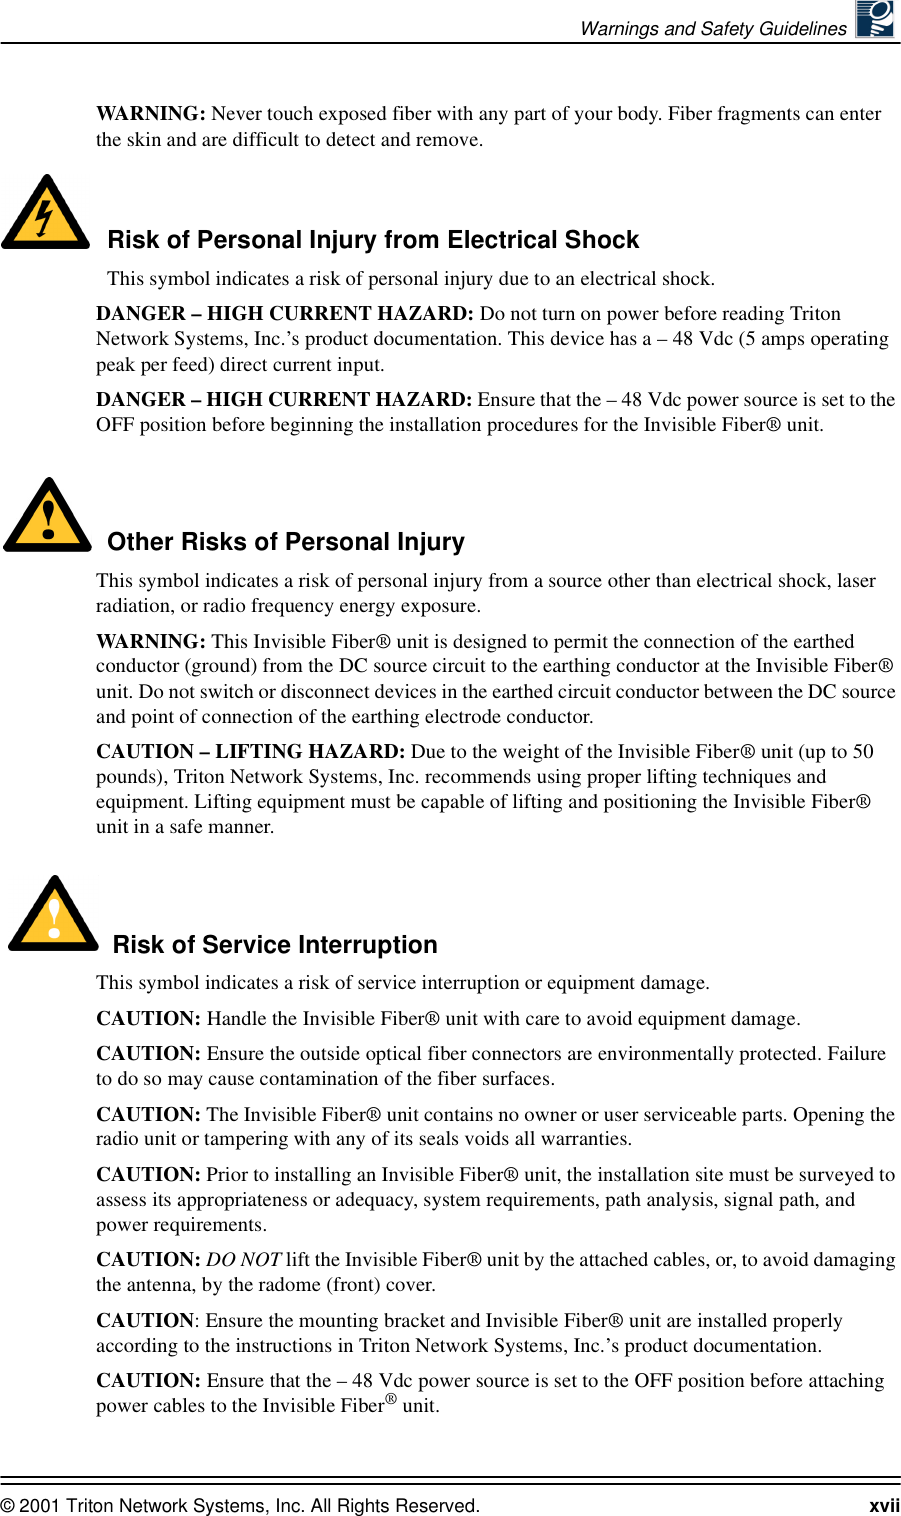 Warnings and Safety Guidelines © 2001 Triton Network Systems, Inc. All Rights Reserved. xviiWAR N IN G :  Never touch exposed fiber with any part of your body. Fiber fragments can enter the skin and are difficult to detect and remove.Risk of Personal Injury from Electrical ShockThis symbol indicates a risk of personal injury due to an electrical shock.DANGER – HIGH CURRENT HAZARD: Do not turn on power before reading Triton Network Systems, Inc.’s product documentation. This device has a – 48 Vdc (5 amps operating peak per feed) direct current input.DANGER – HIGH CURRENT HAZARD: Ensure that the – 48 Vdc power source is set to the OFF position before beginning the installation procedures for the Invisible Fiber® unit. Other Risks of Personal InjuryThis symbol indicates a risk of personal injury from a source other than electrical shock, laser radiation, or radio frequency energy exposure.WAR N IN G :  This Invisible Fiber® unit is designed to permit the connection of the earthed conductor (ground) from the DC source circuit to the earthing conductor at the Invisible Fiber® unit. Do not switch or disconnect devices in the earthed circuit conductor between the DC source and point of connection of the earthing electrode conductor.CAUTION – LIFTING HAZARD: Due to the weight of the Invisible Fiber® unit (up to 50 pounds), Triton Network Systems, Inc. recommends using proper lifting techniques and equipment. Lifting equipment must be capable of lifting and positioning the Invisible Fiber® unit in a safe manner.Risk of Service InterruptionThis symbol indicates a risk of service interruption or equipment damage.CAUTION: Handle the Invisible Fiber® unit with care to avoid equipment damage.CAUTION: Ensure the outside optical fiber connectors are environmentally protected. Failure to do so may cause contamination of the fiber surfaces.CAUTION: The Invisible Fiber® unit contains no owner or user serviceable parts. Opening the radio unit or tampering with any of its seals voids all warranties.CAUTION: Prior to installing an Invisible Fiber® unit, the installation site must be surveyed to assess its appropriateness or adequacy, system requirements, path analysis, signal path, and power requirements.CAUTION: DO NOT lift the Invisible Fiber® unit by the attached cables, or, to avoid damaging the antenna, by the radome (front) cover.CAUTION: Ensure the mounting bracket and Invisible Fiber® unit are installed properly according to the instructions in Triton Network Systems, Inc.’s product documentation.CAUTION: Ensure that the – 48 Vdc power source is set to the OFF position before attaching power cables to the Invisible Fiber® unit.